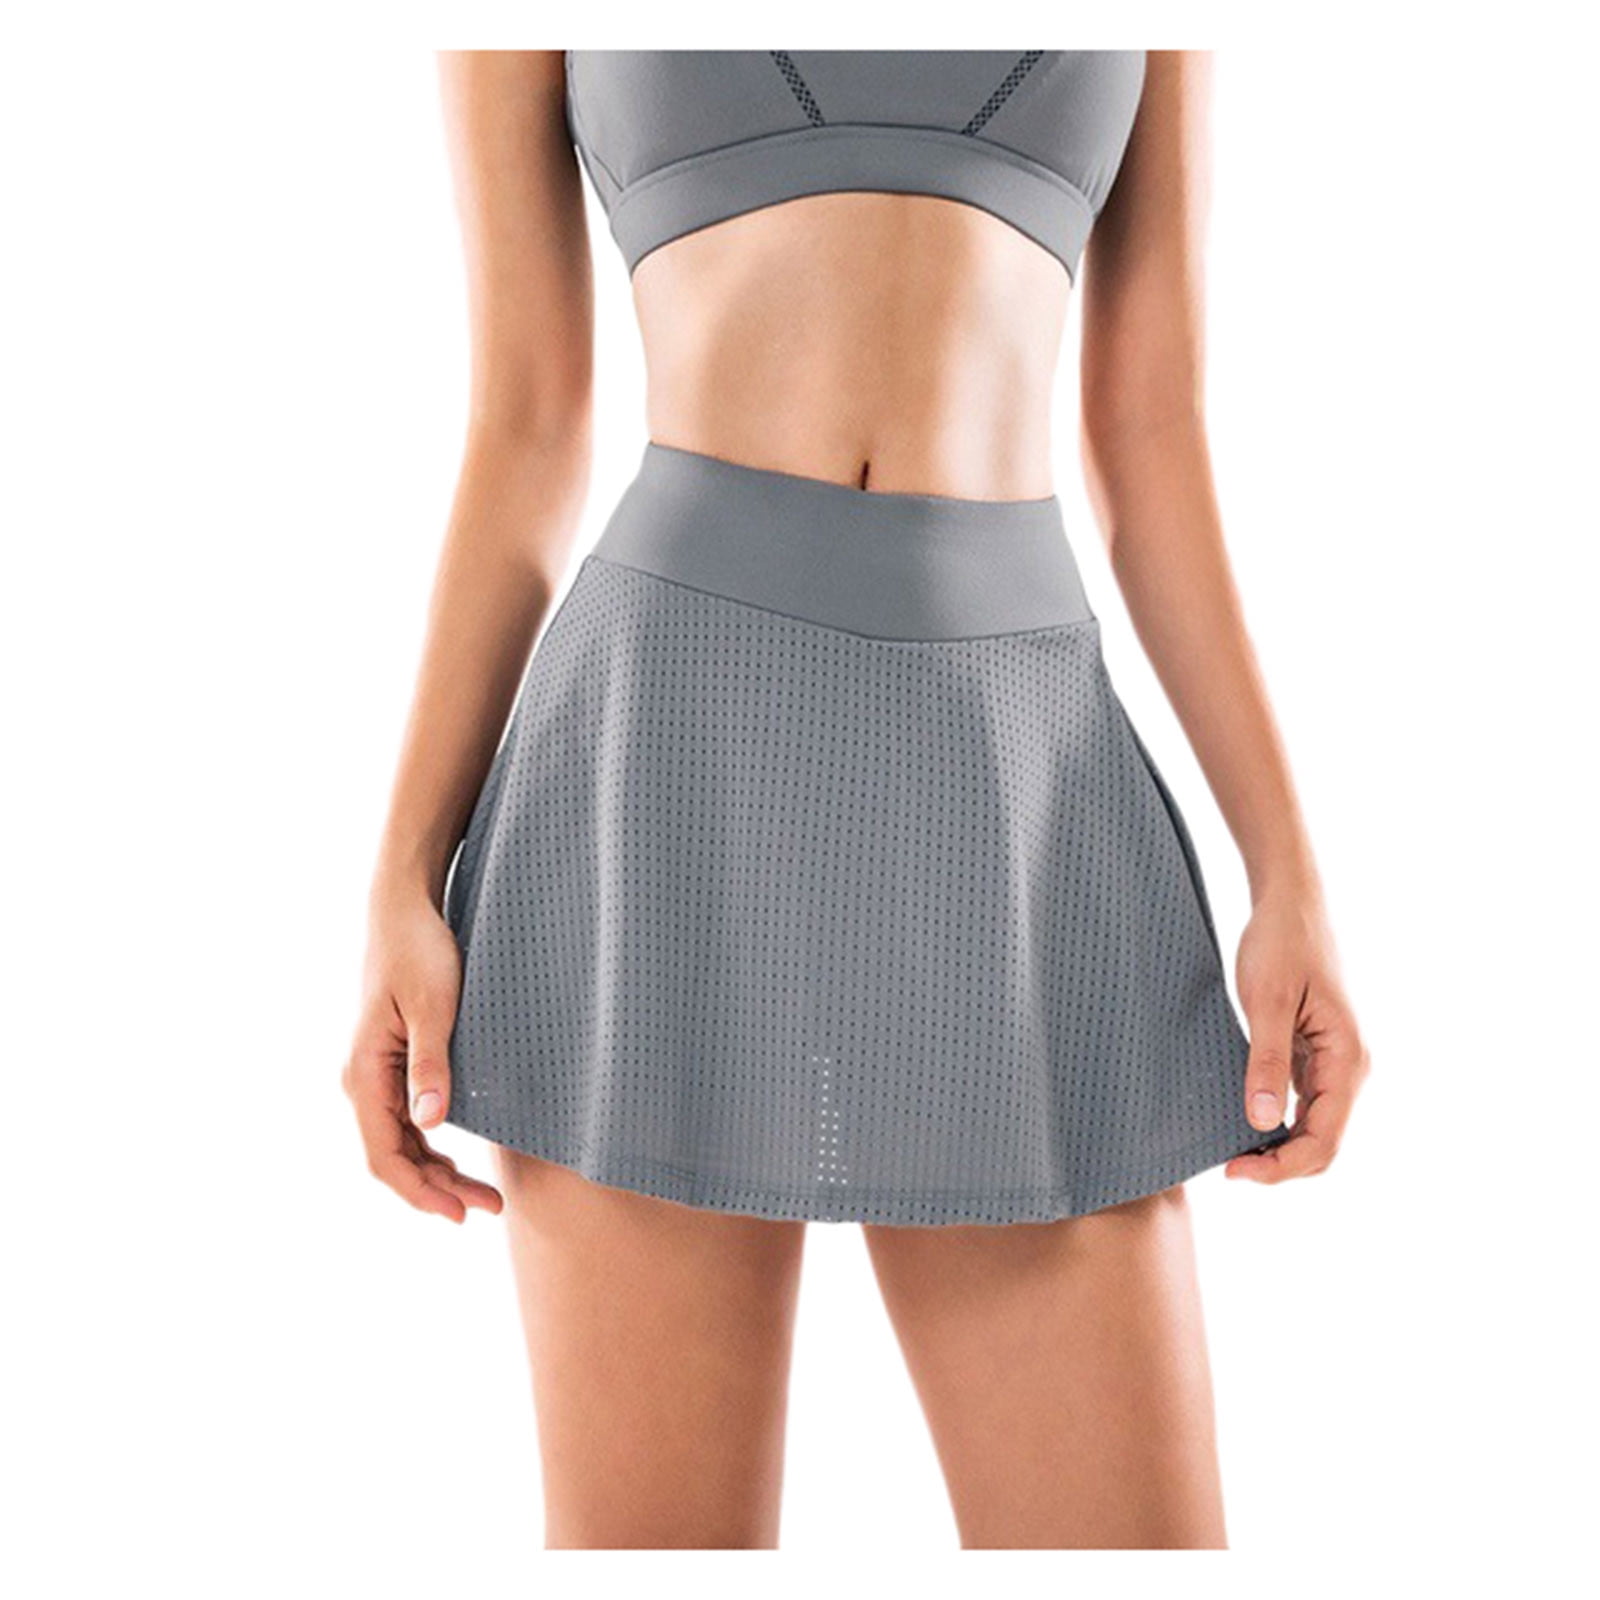 Women's Active Skort Athletic Stretchy Pleated Tennis Skirt for Running  Golf Workout - Walmart.com